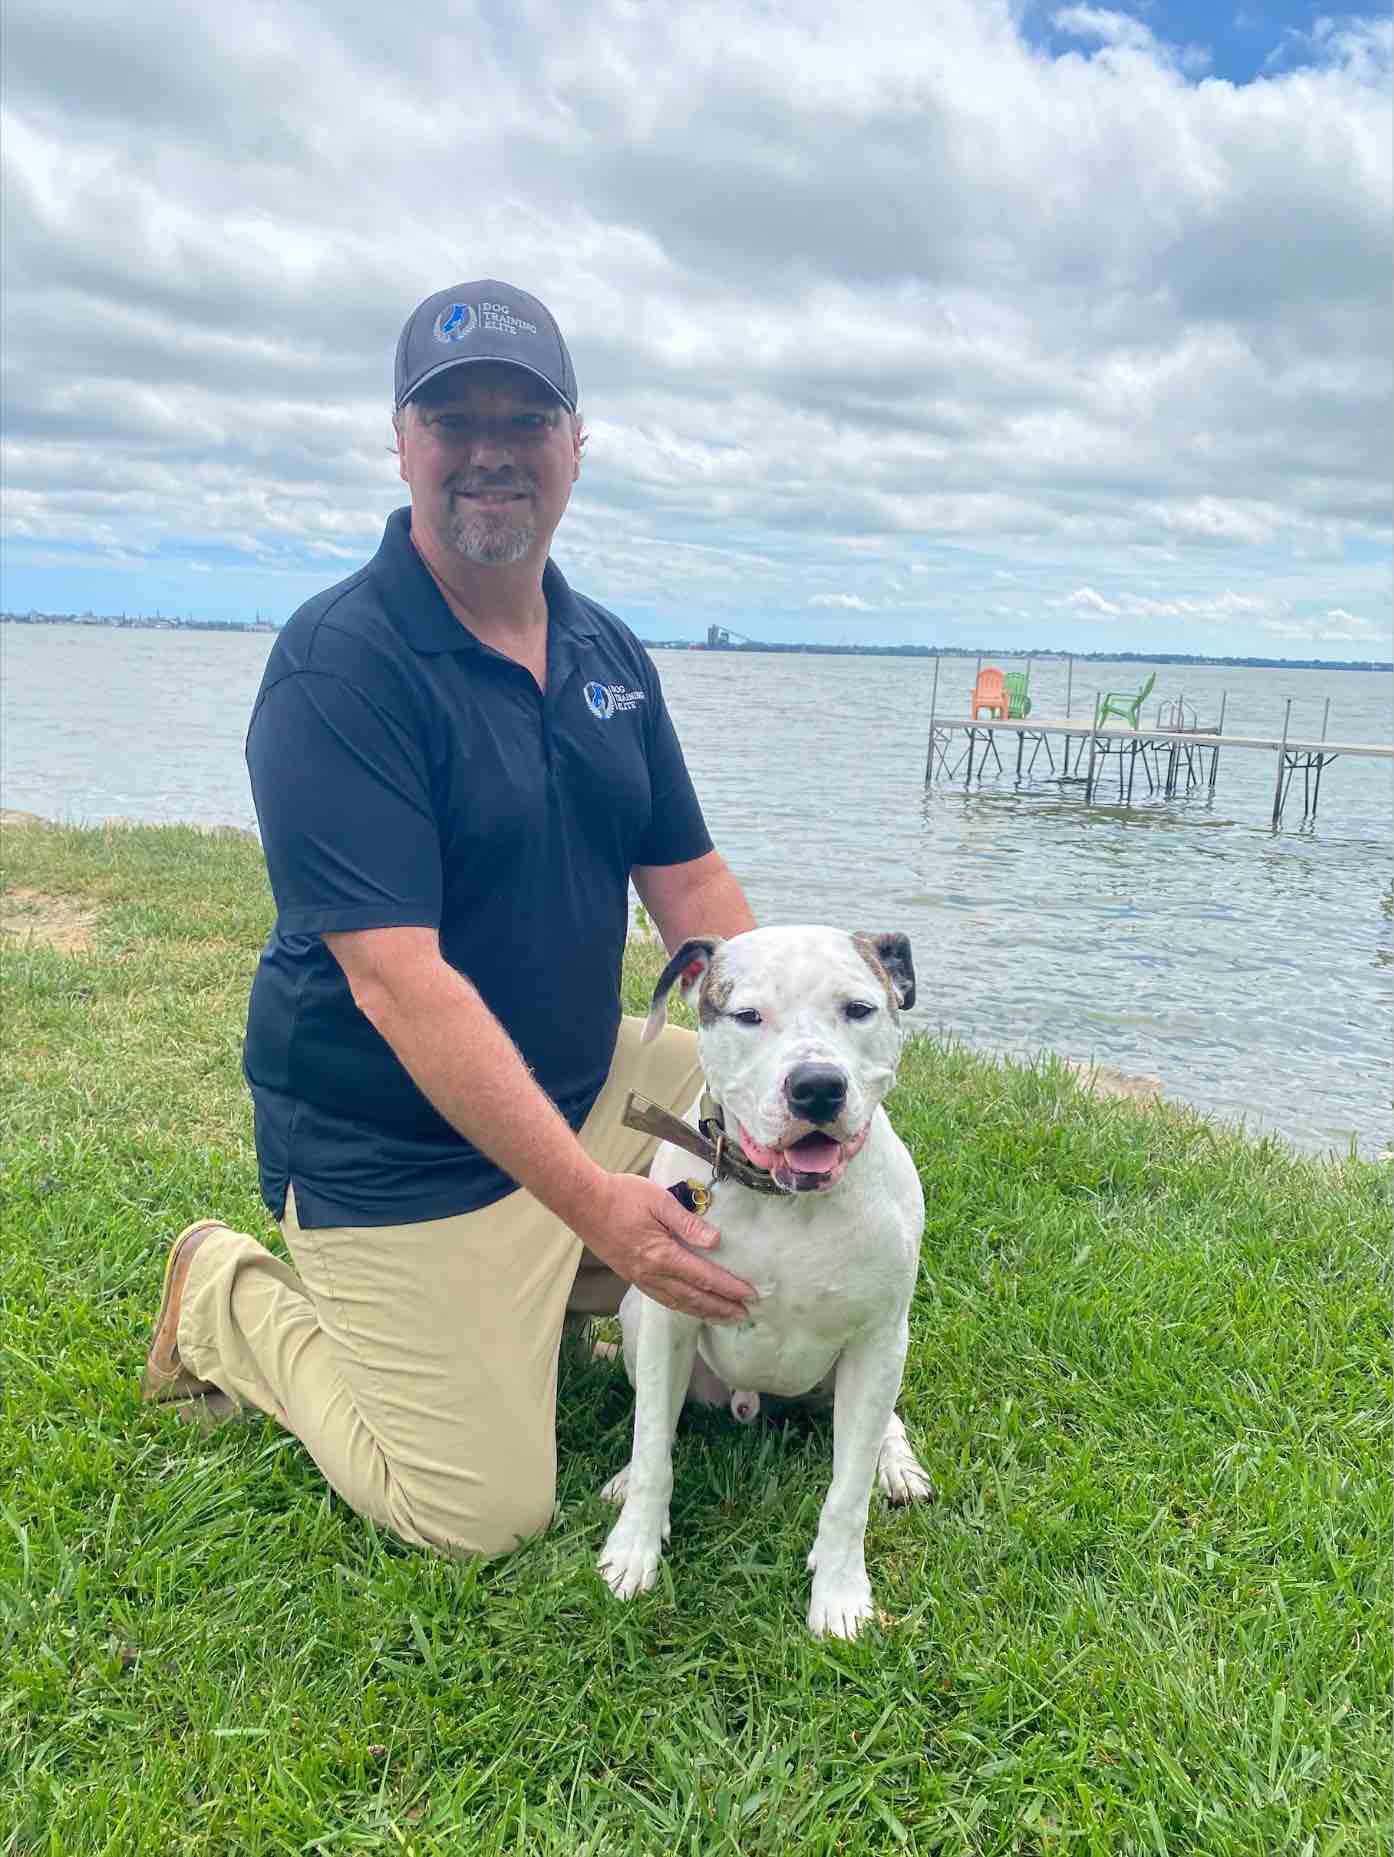 Dan O'Malley and his dog are excited to join the Dog Training Elite family.